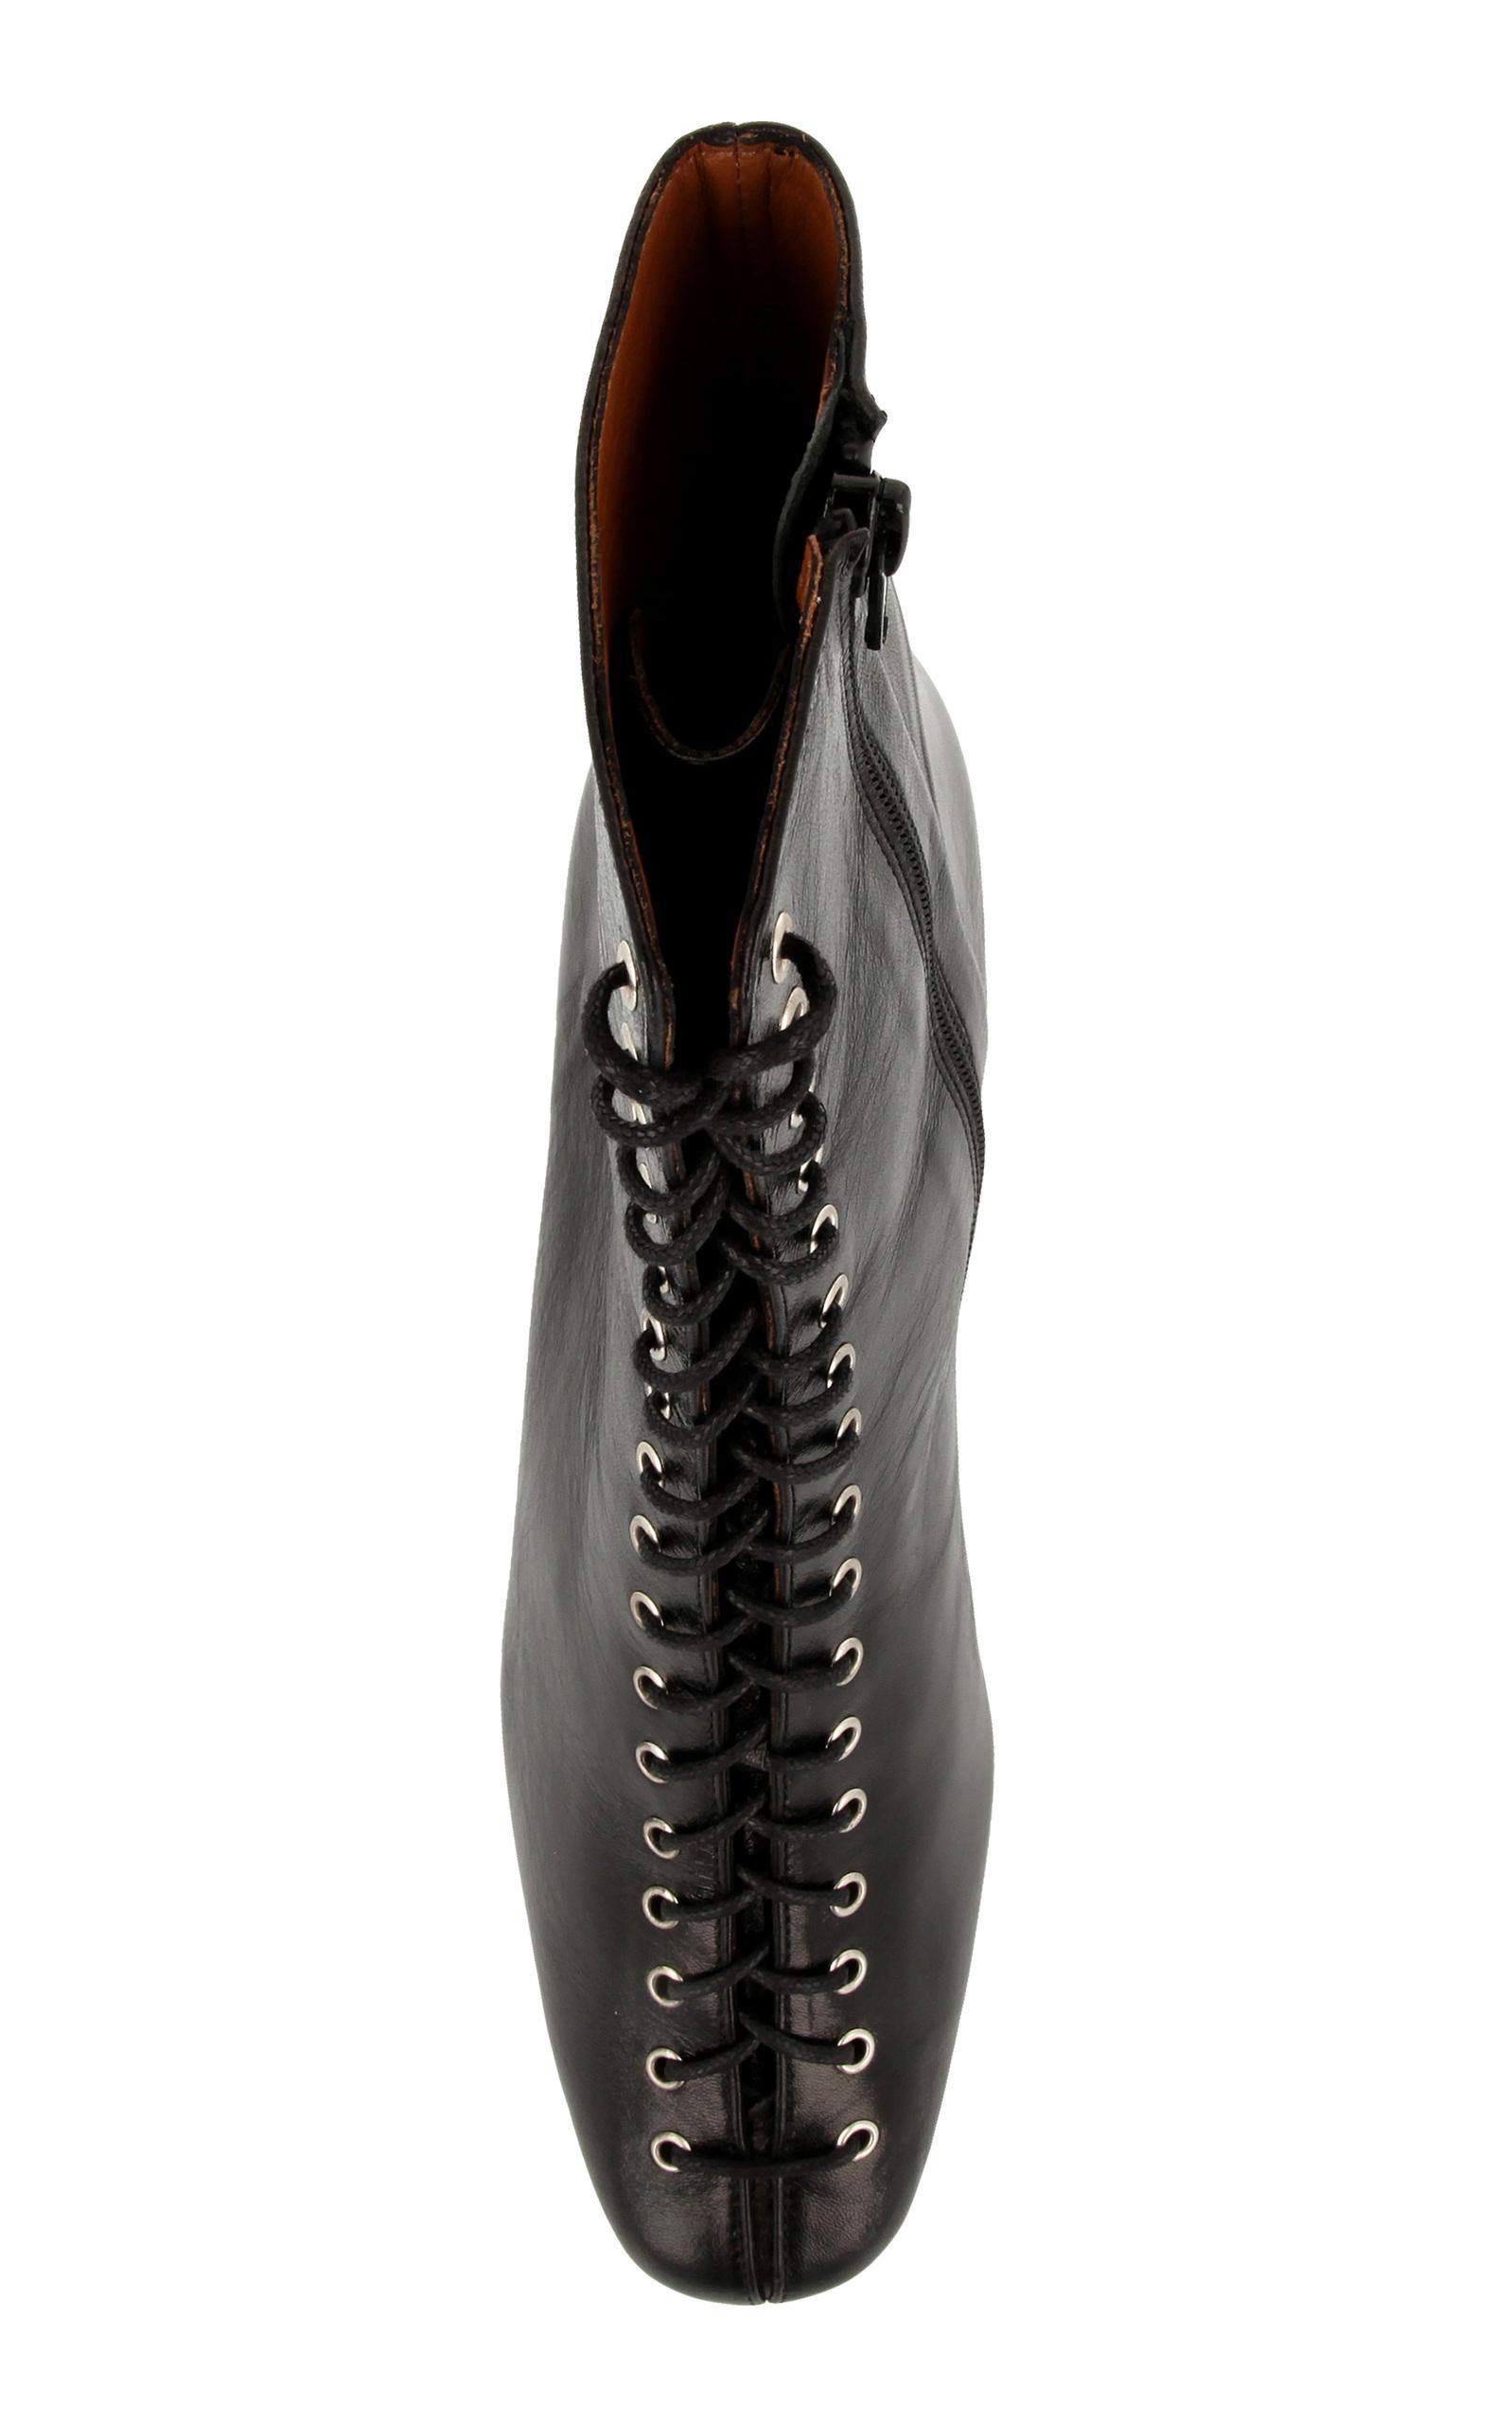 BY FAR Becca Lace Up Leather Boot in Black - Lyst